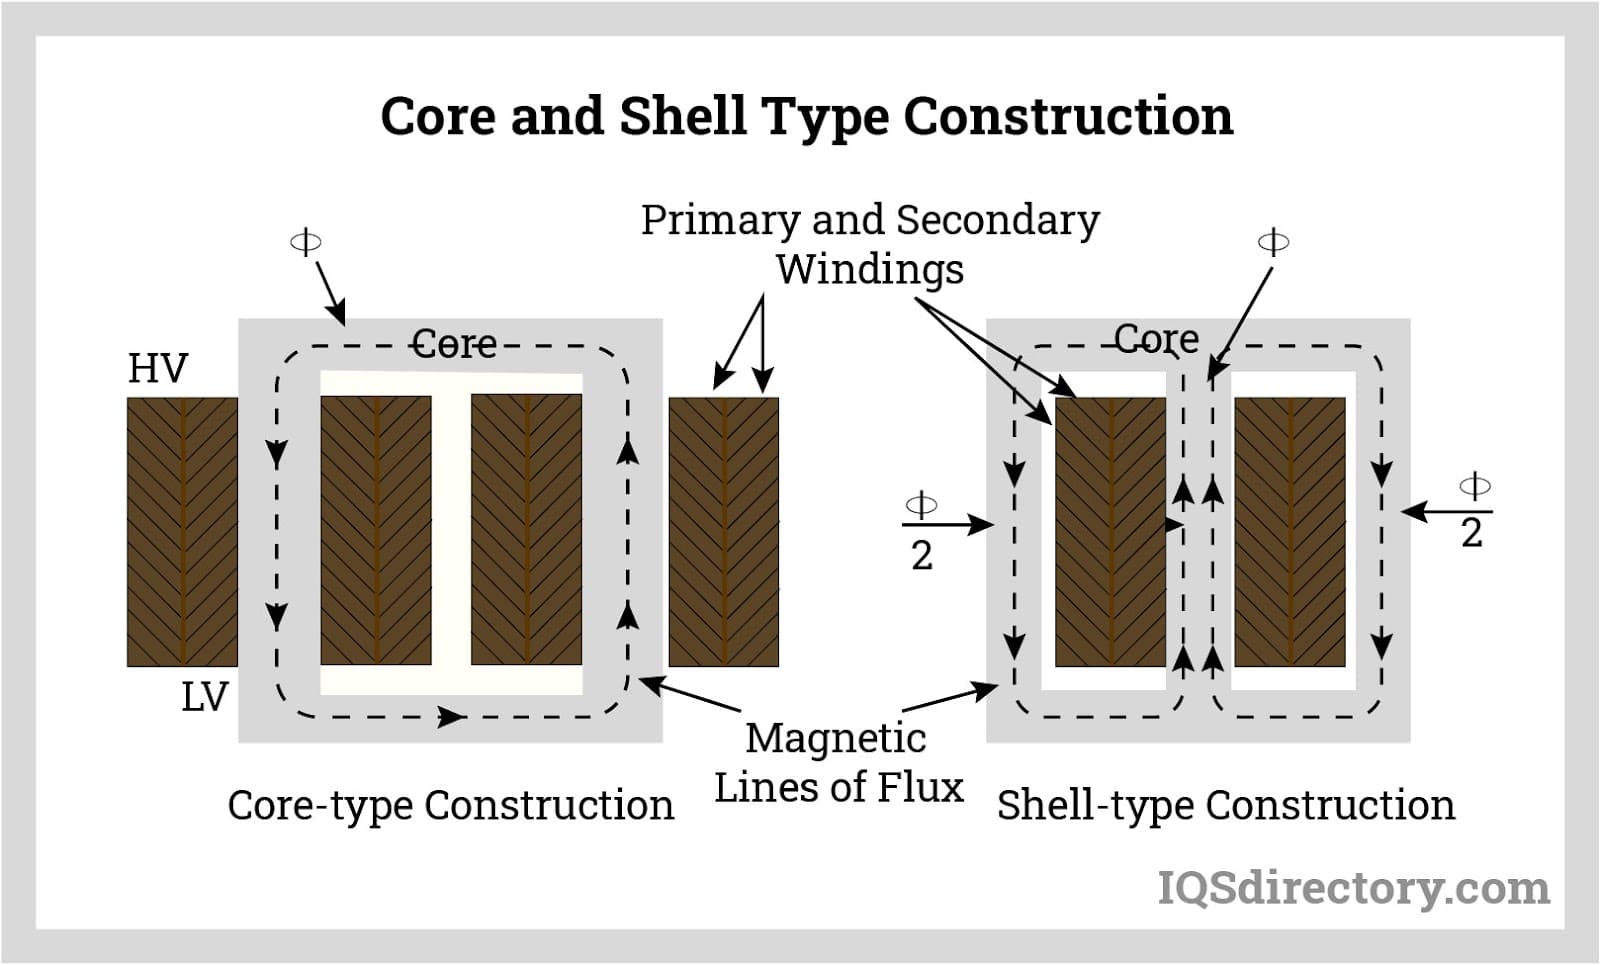 Core and Shell Type Construction